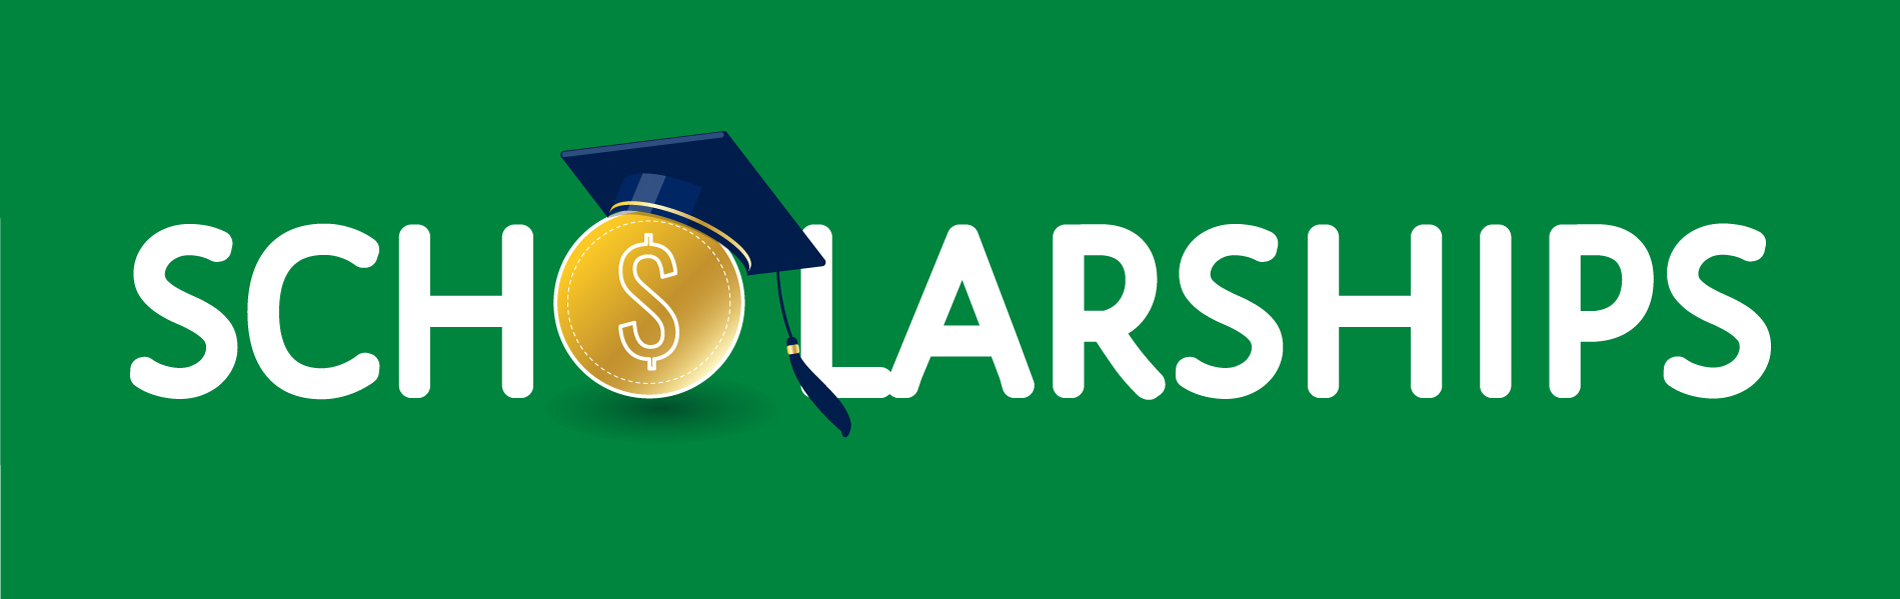 Scholarships in white letters, green background.